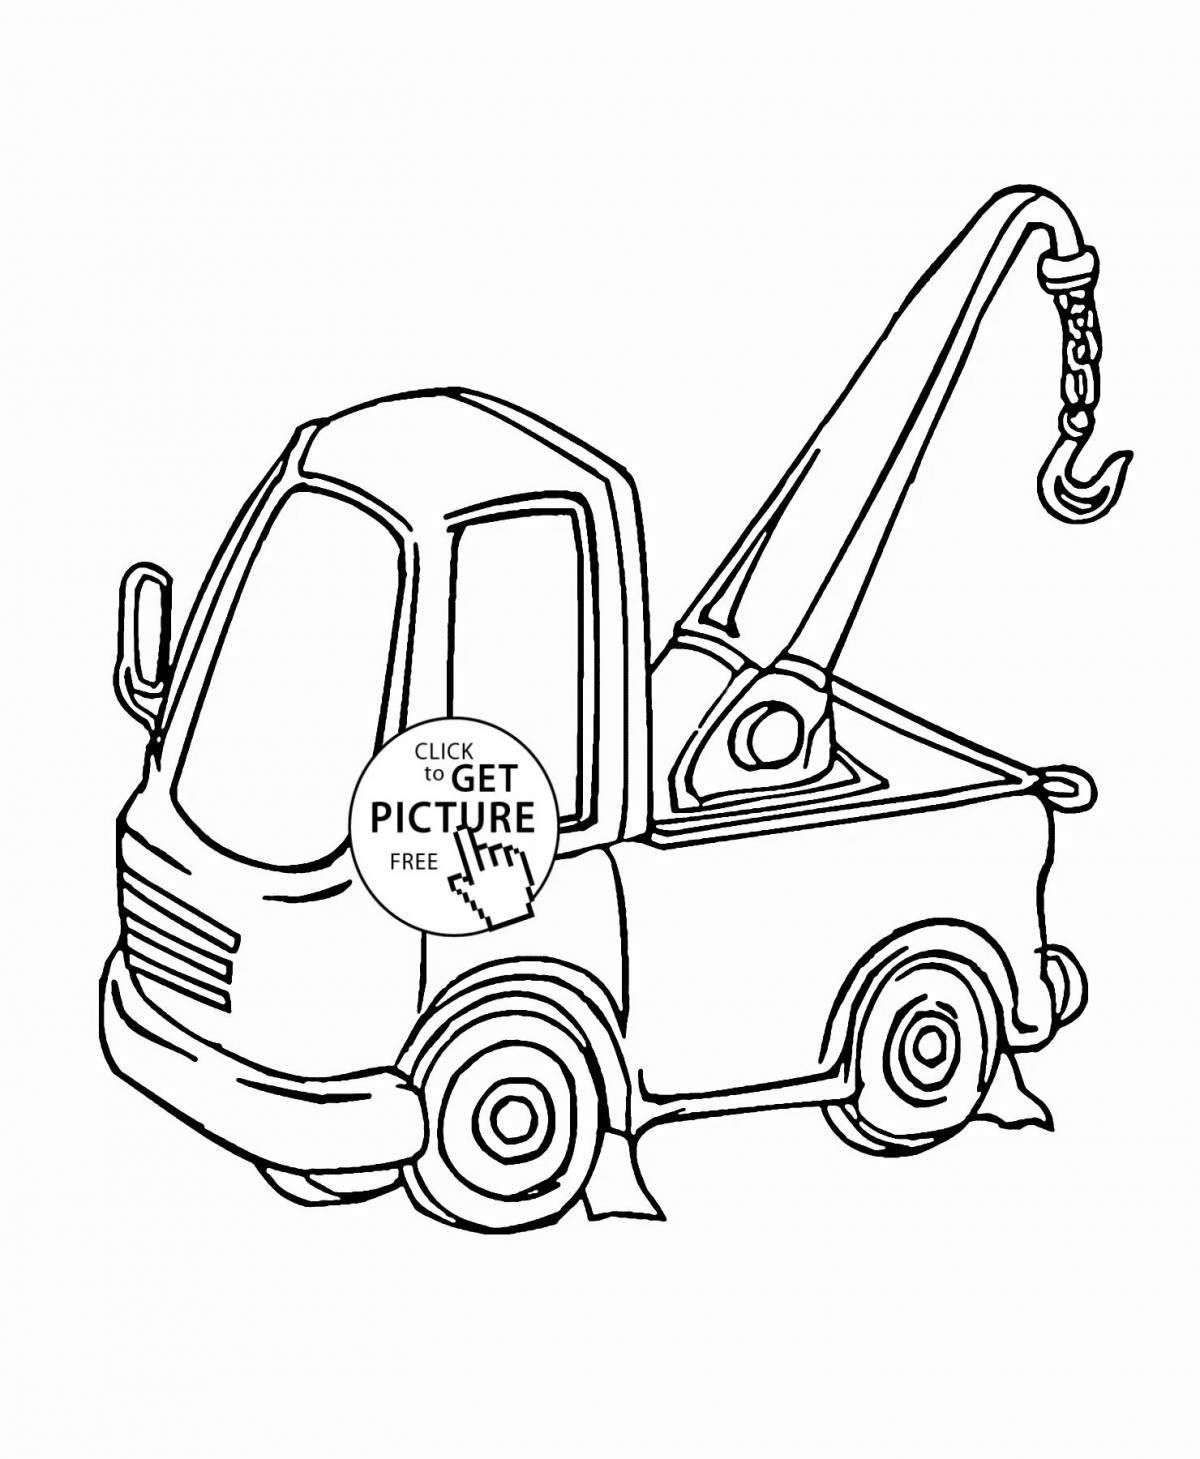 Coloring book brave tow truck